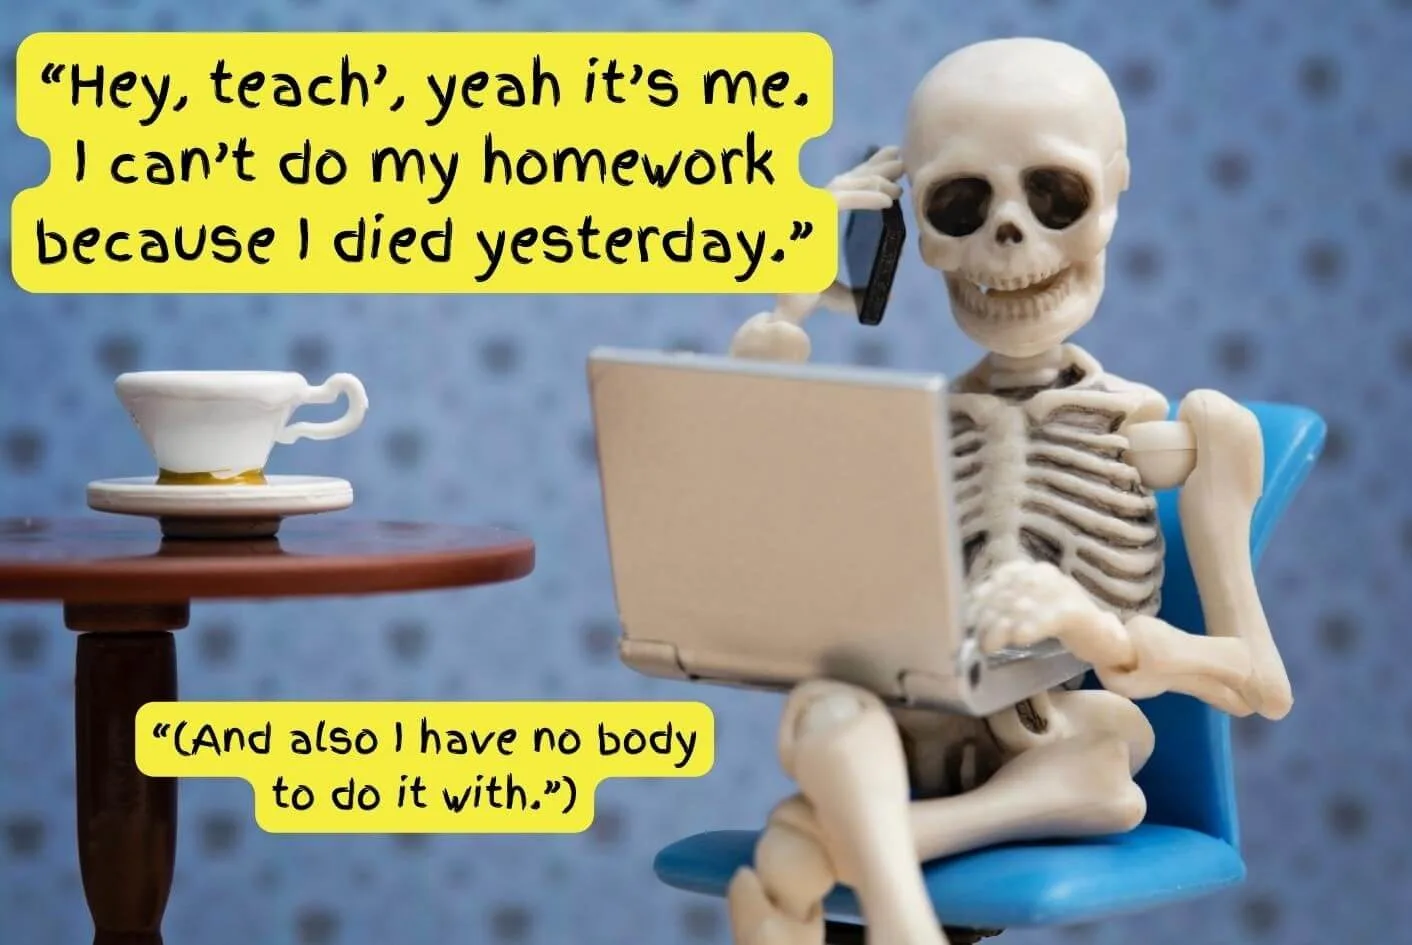 A skeleton student phoning their teacher with a funny excuse for not doing their homework.